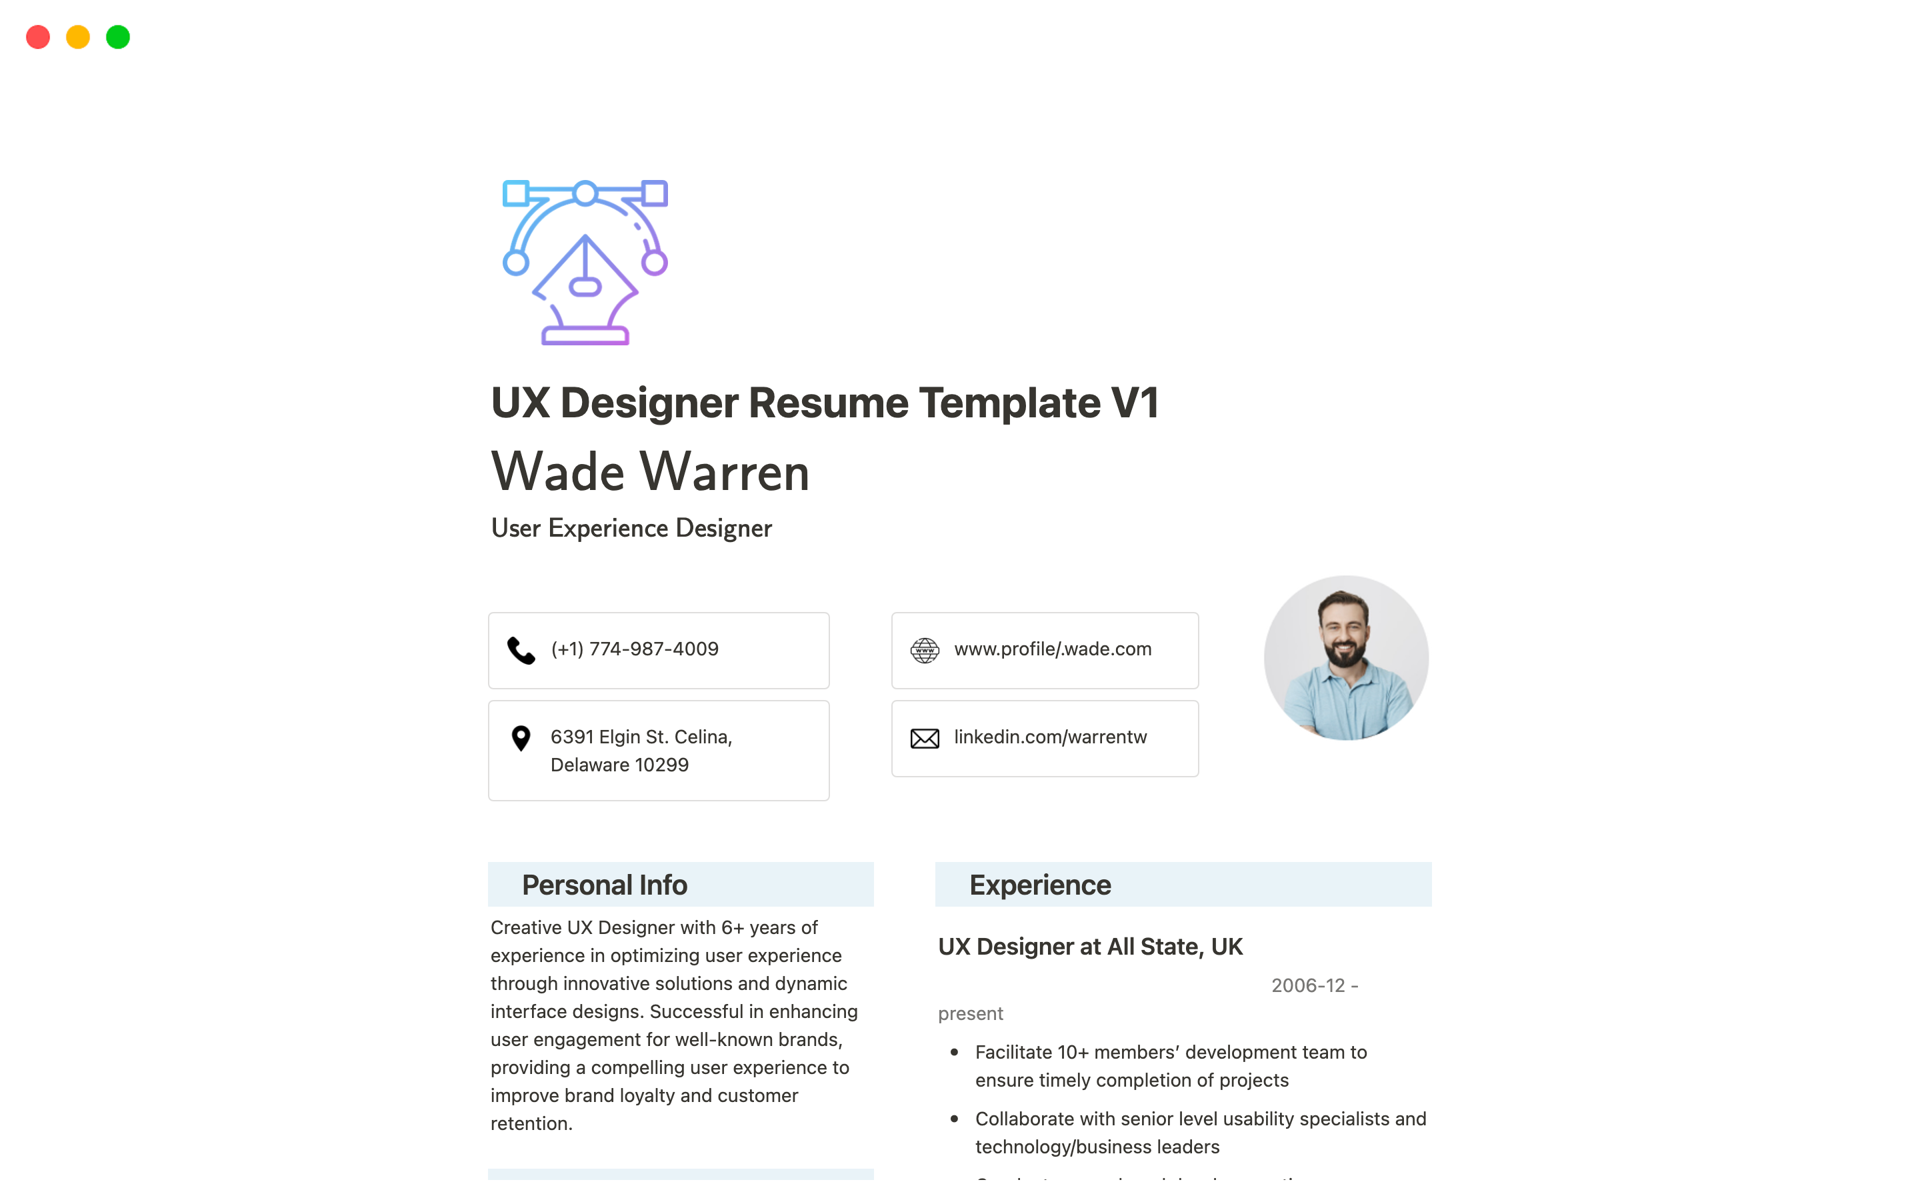 🎨 UX Designer Journey: Crafted Excellence Edition 🌟
Embark on a creative career adventure with our UX Designer Resume Template, meticulously crafted to guide you through showcasing your skills and experiences.